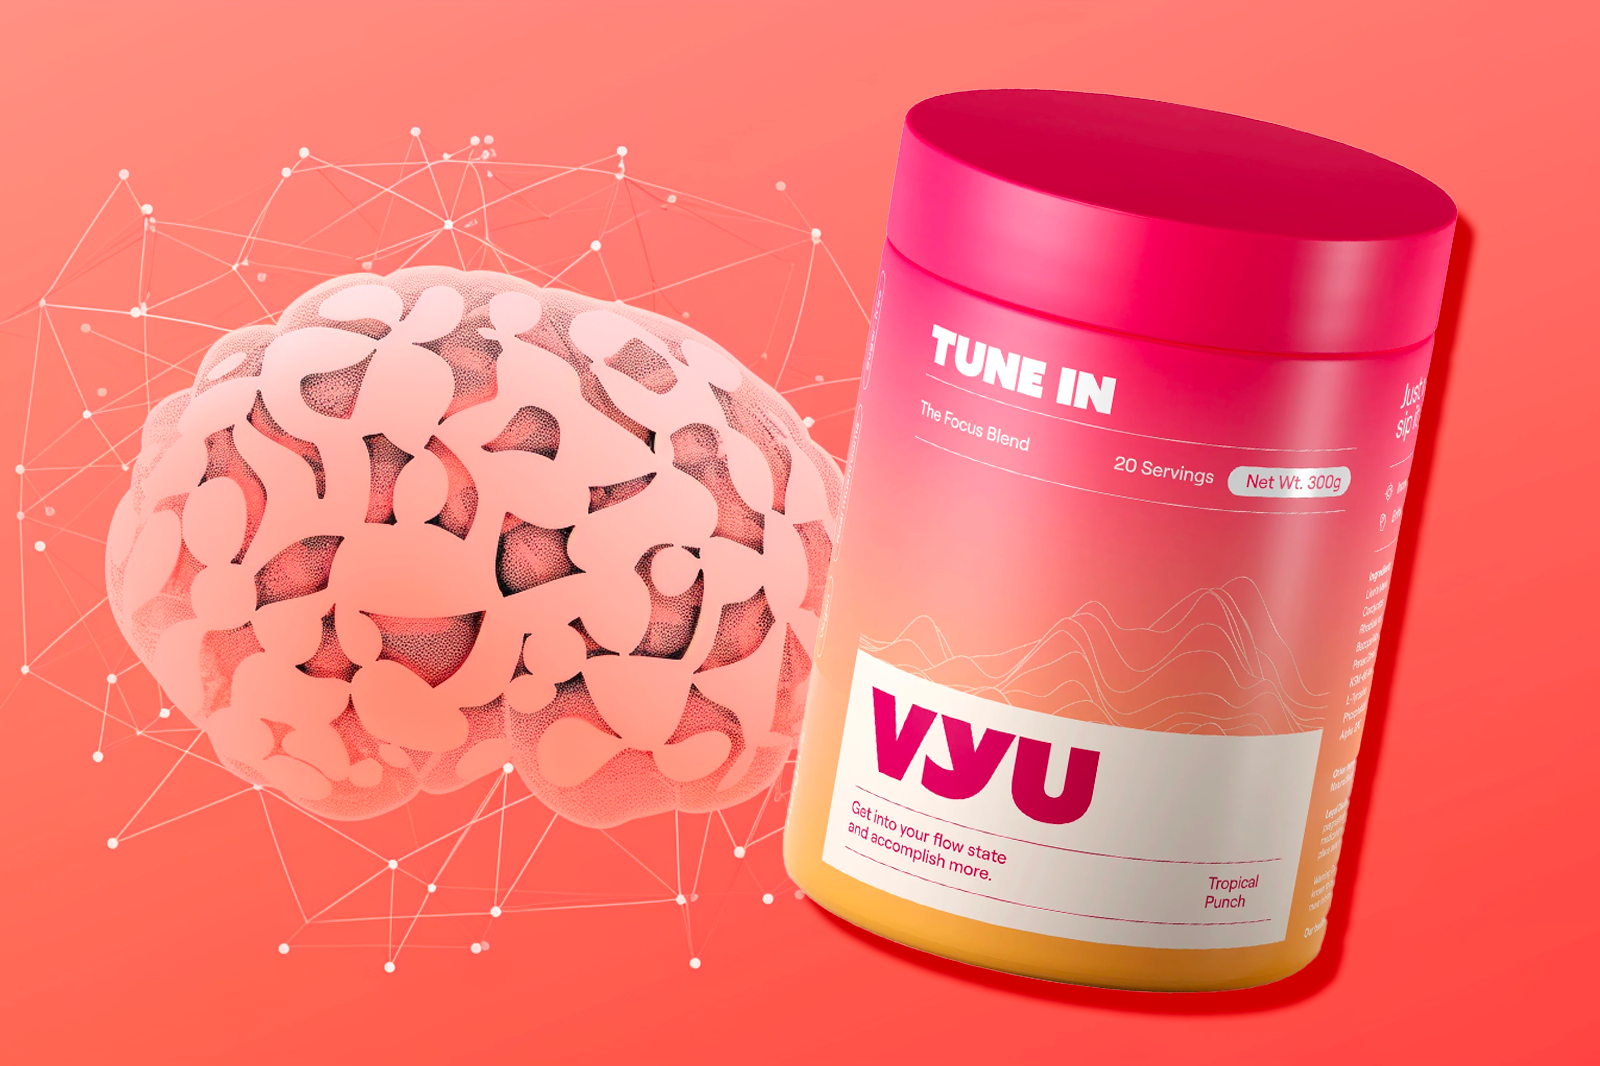 A container of VYU TUNE IN with Tropical Punch flavor placed against a peach-colored background, featuring an image of the brain inside